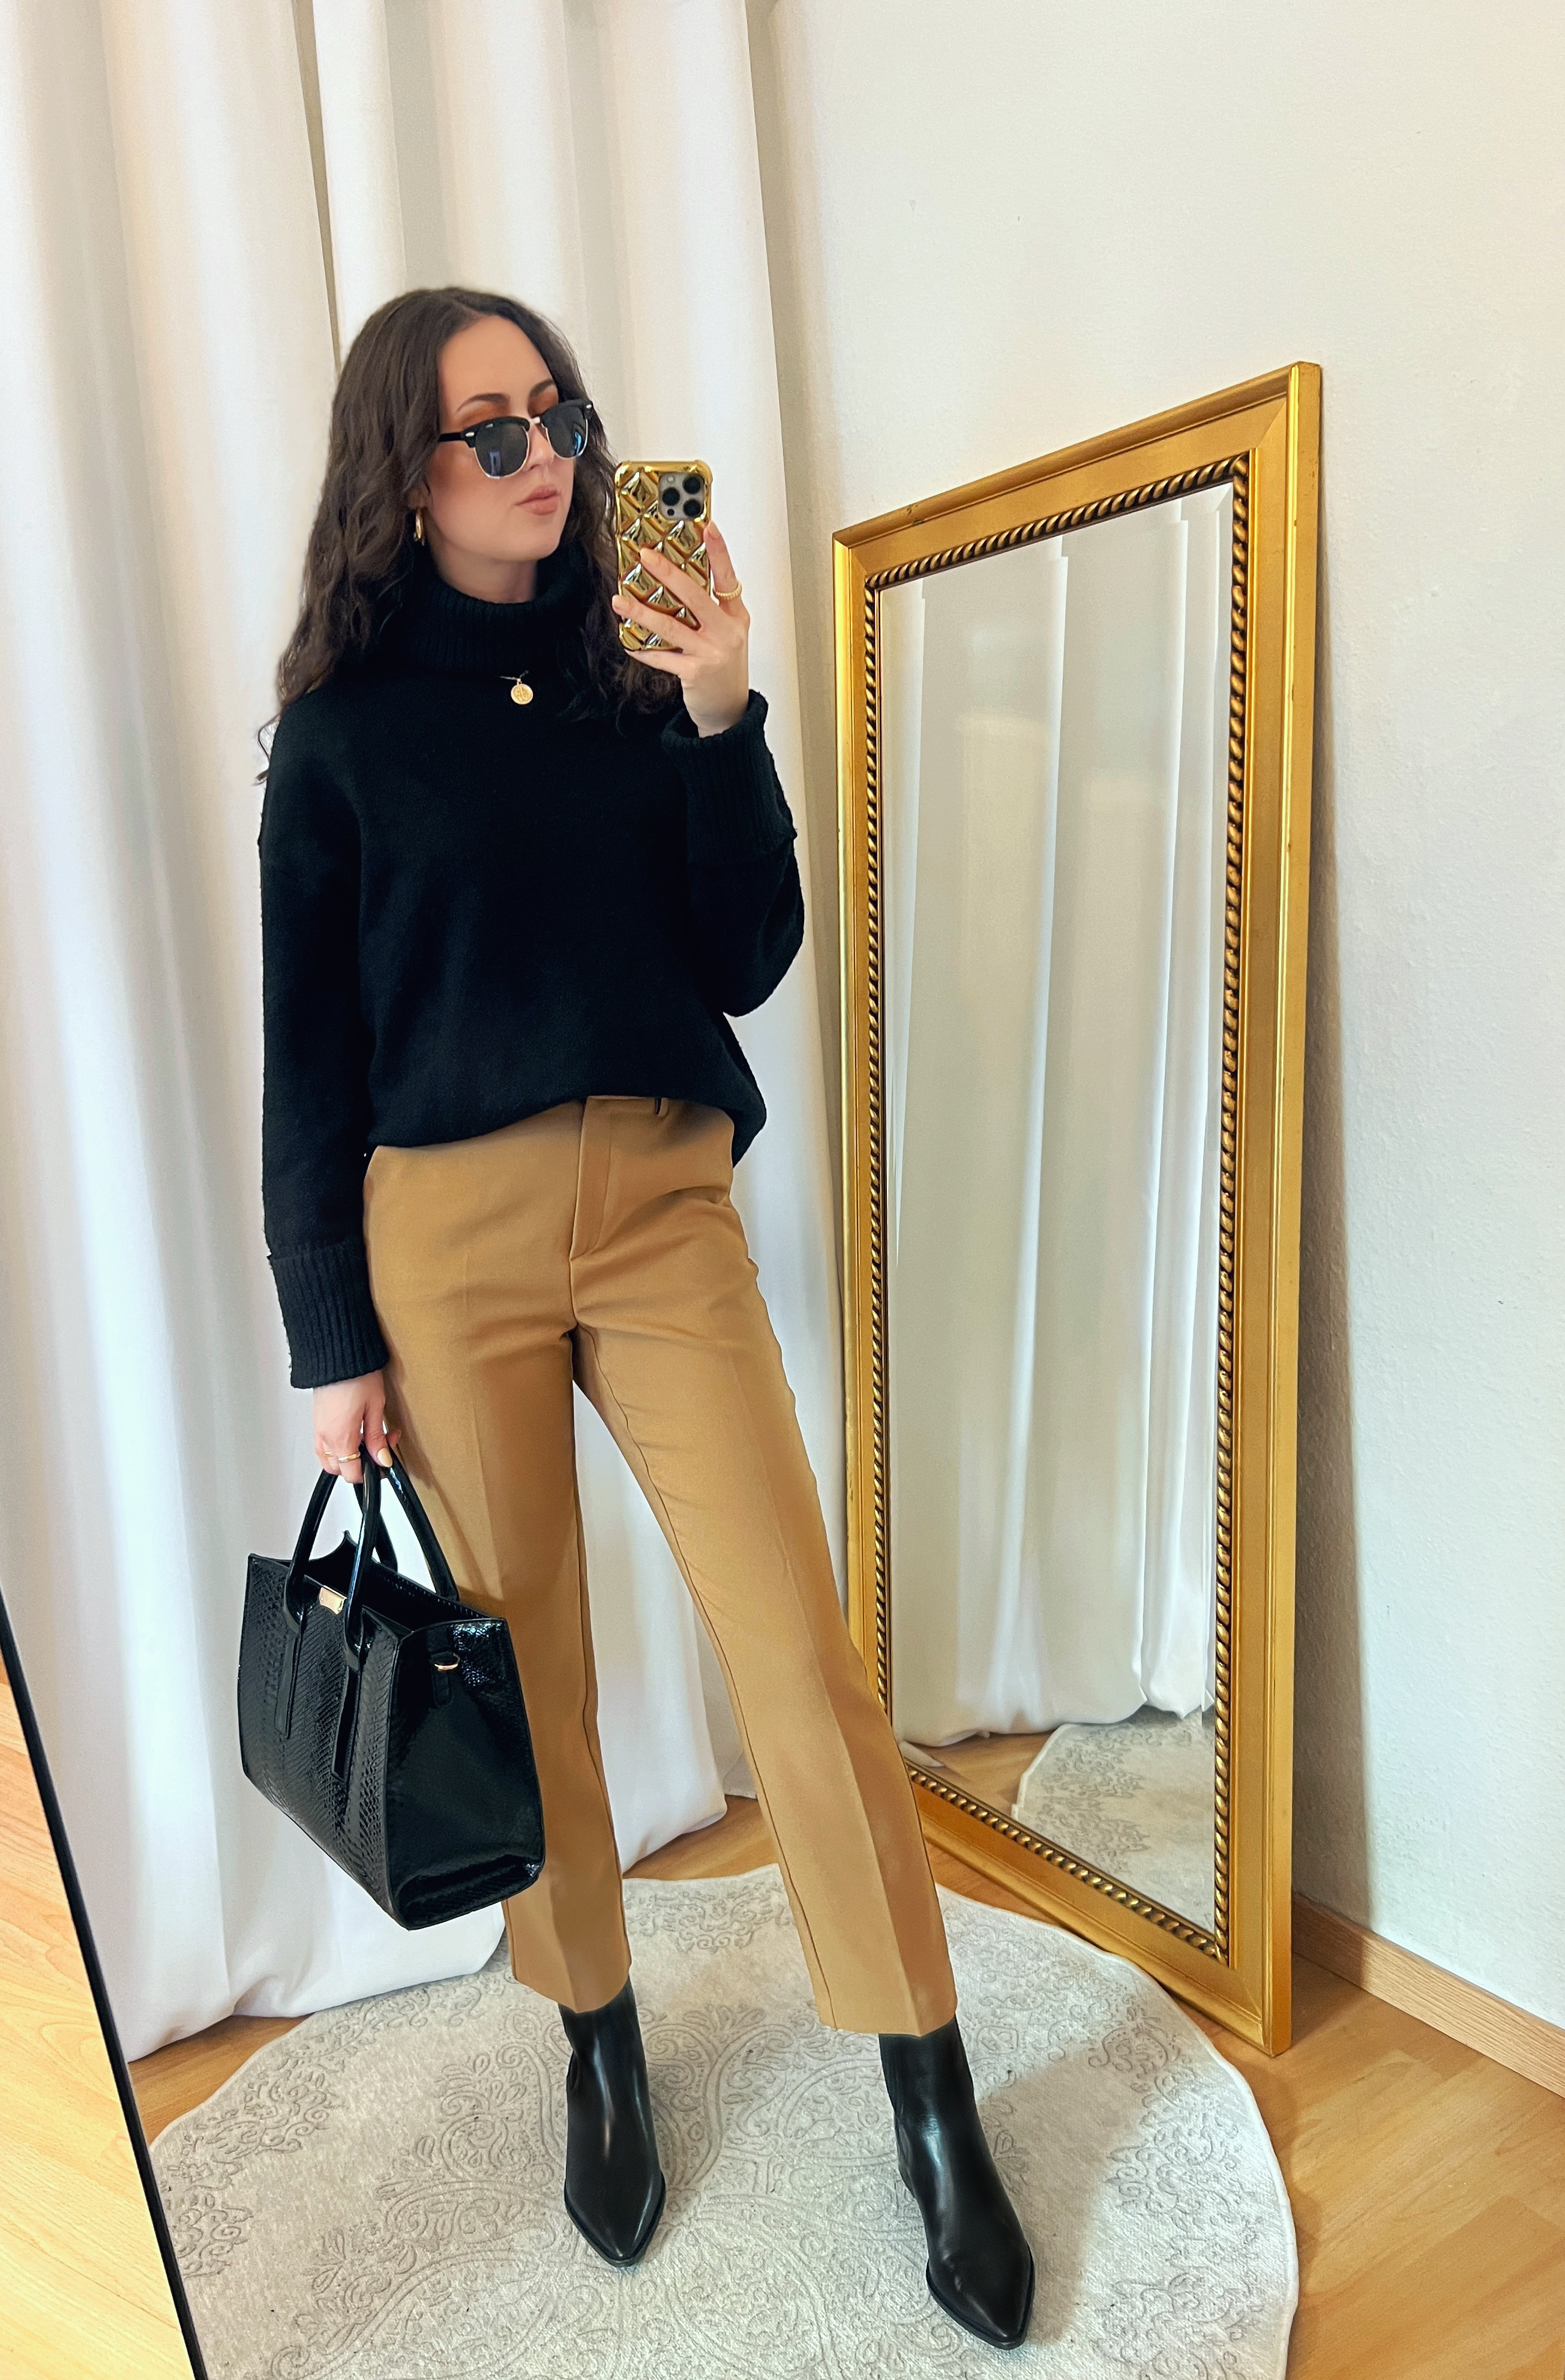 Black Turtleneck Sweater and Camel Pants Outfit